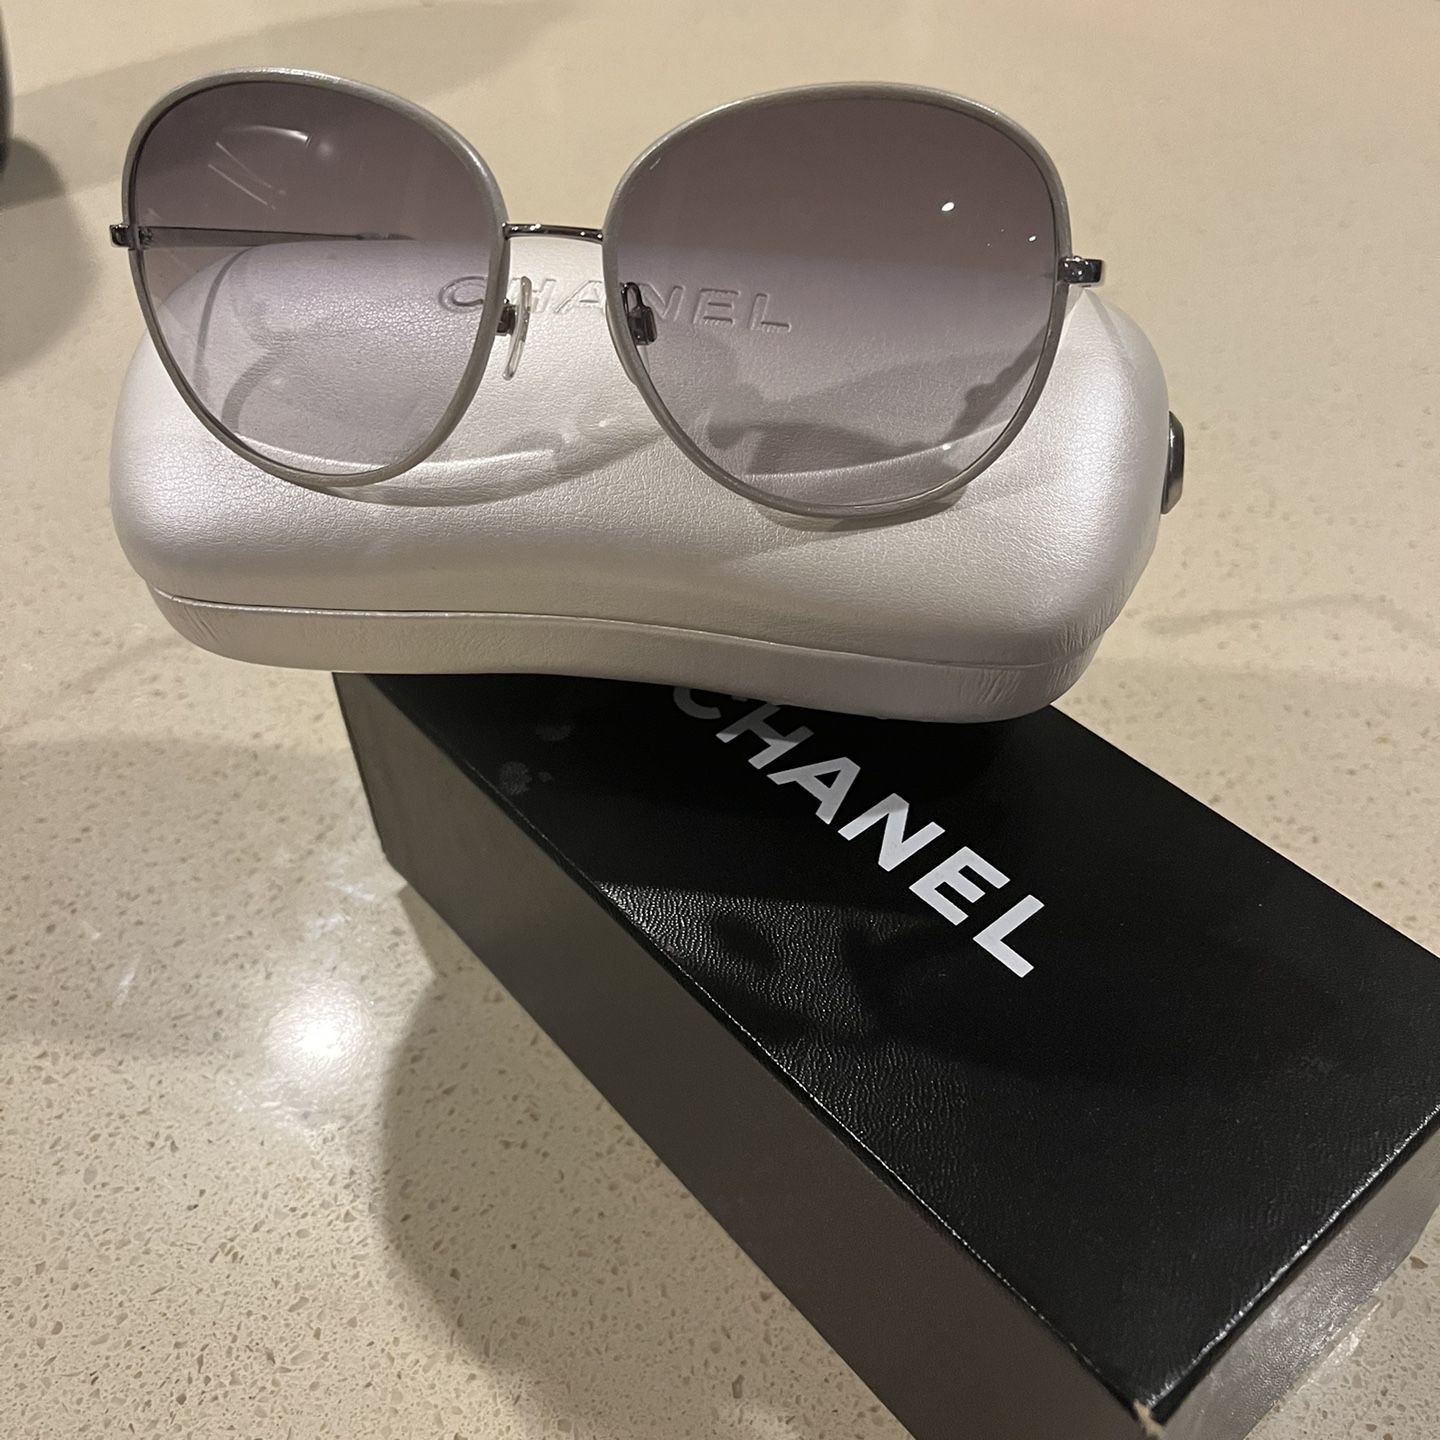 Chanel Sunglasses (AUTHENTIC) for Sale in Huntington Beach, CA - OfferUp